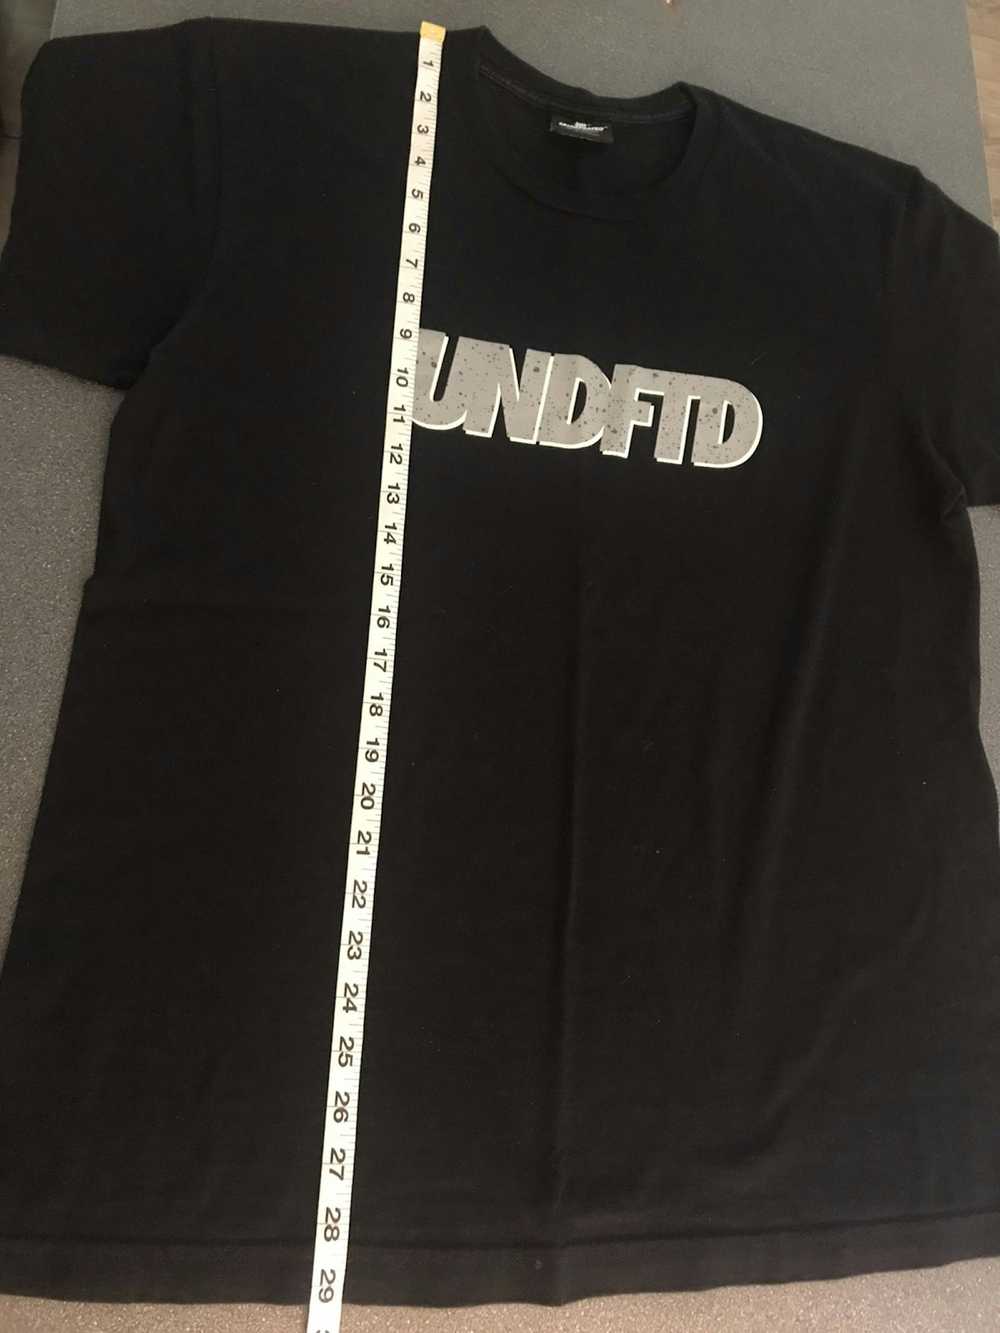 Undefeated Undefeated UNDFTD cement logo tee large - image 6